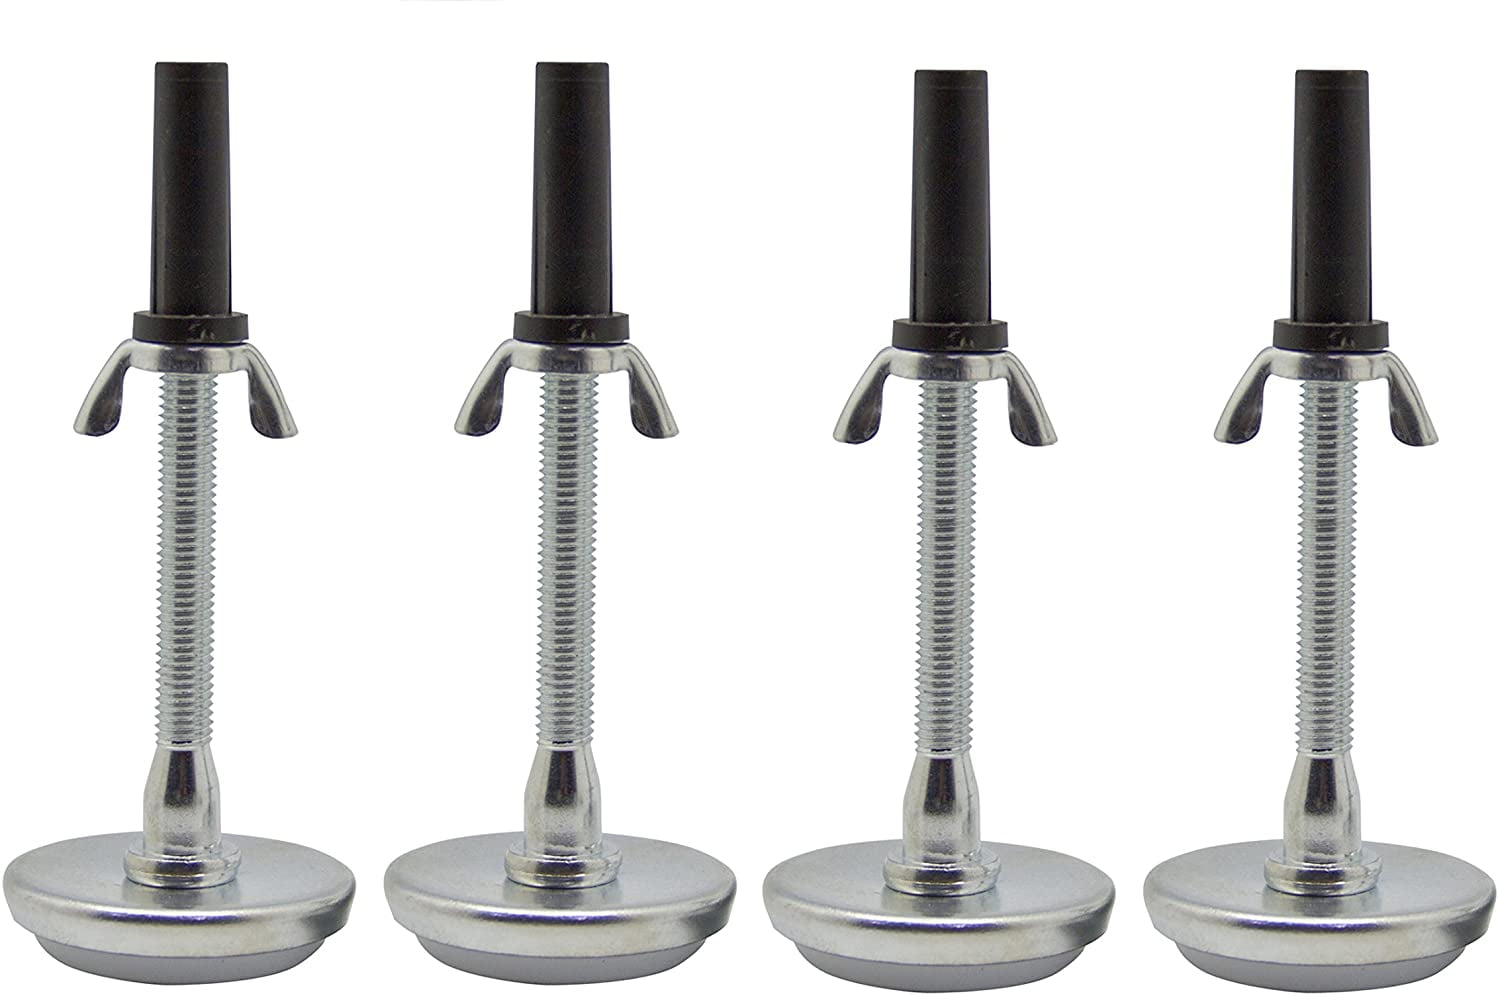 Set of 4 Universal 5" Adjustable Height Bed Frame Risers Threaded Glides/Legs 